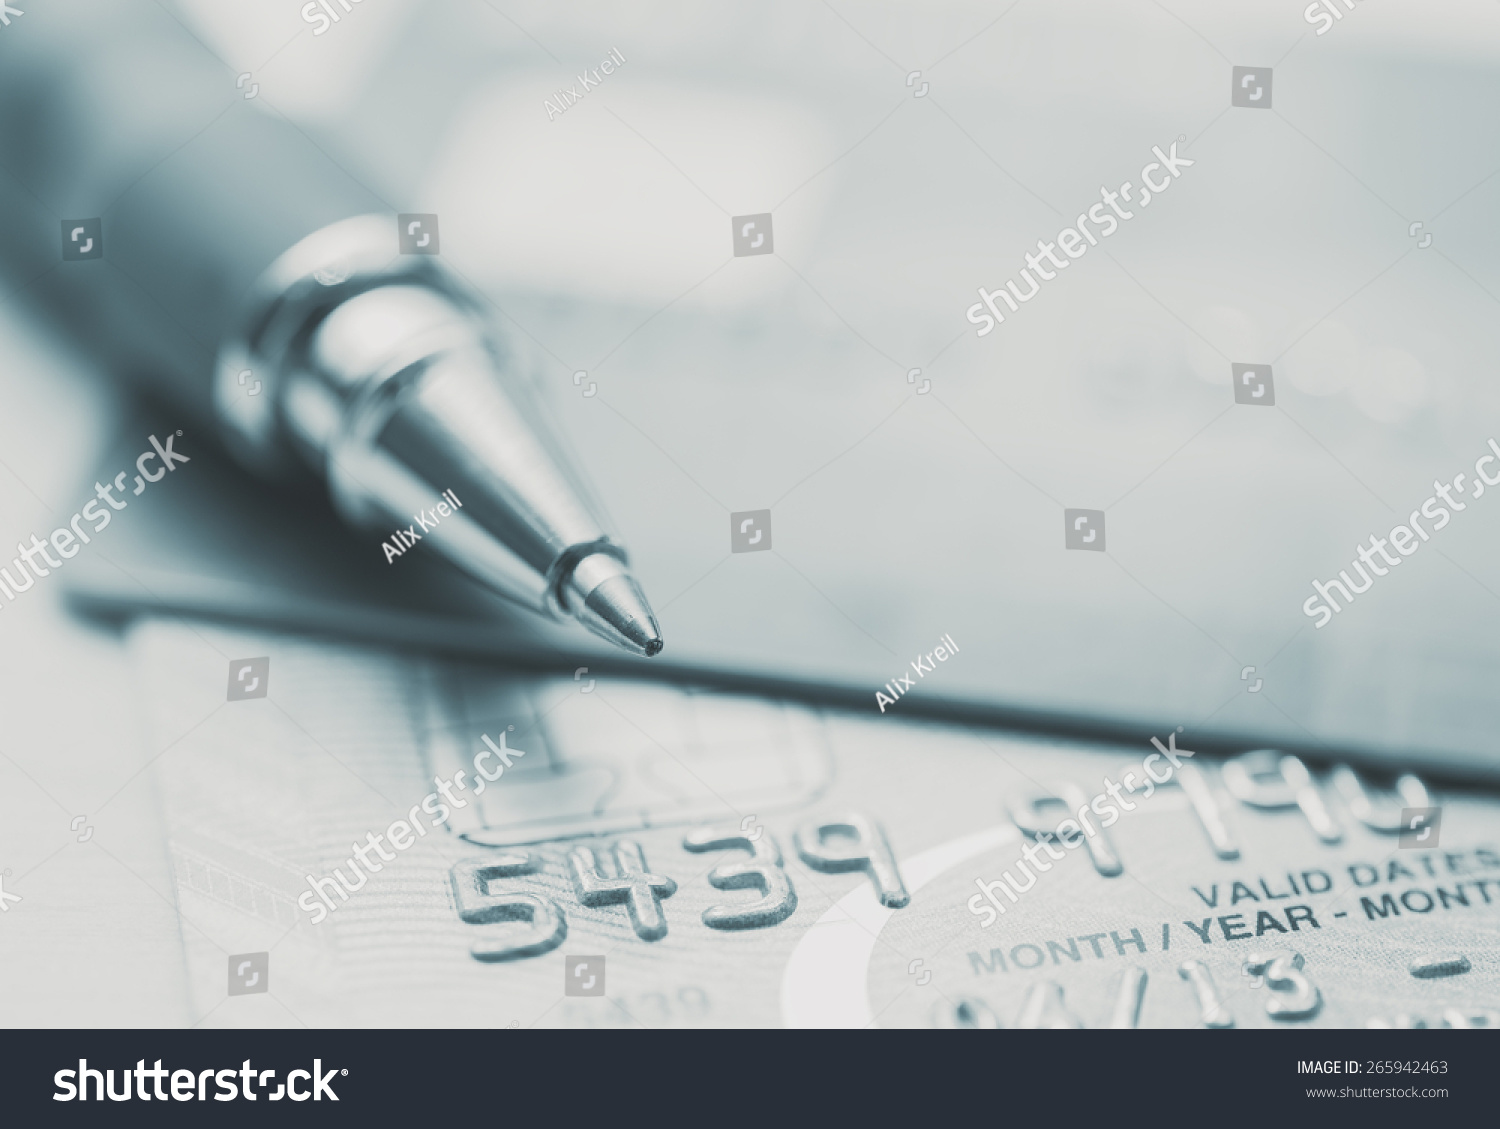 Split toned image of credit cards and a pen #265942463